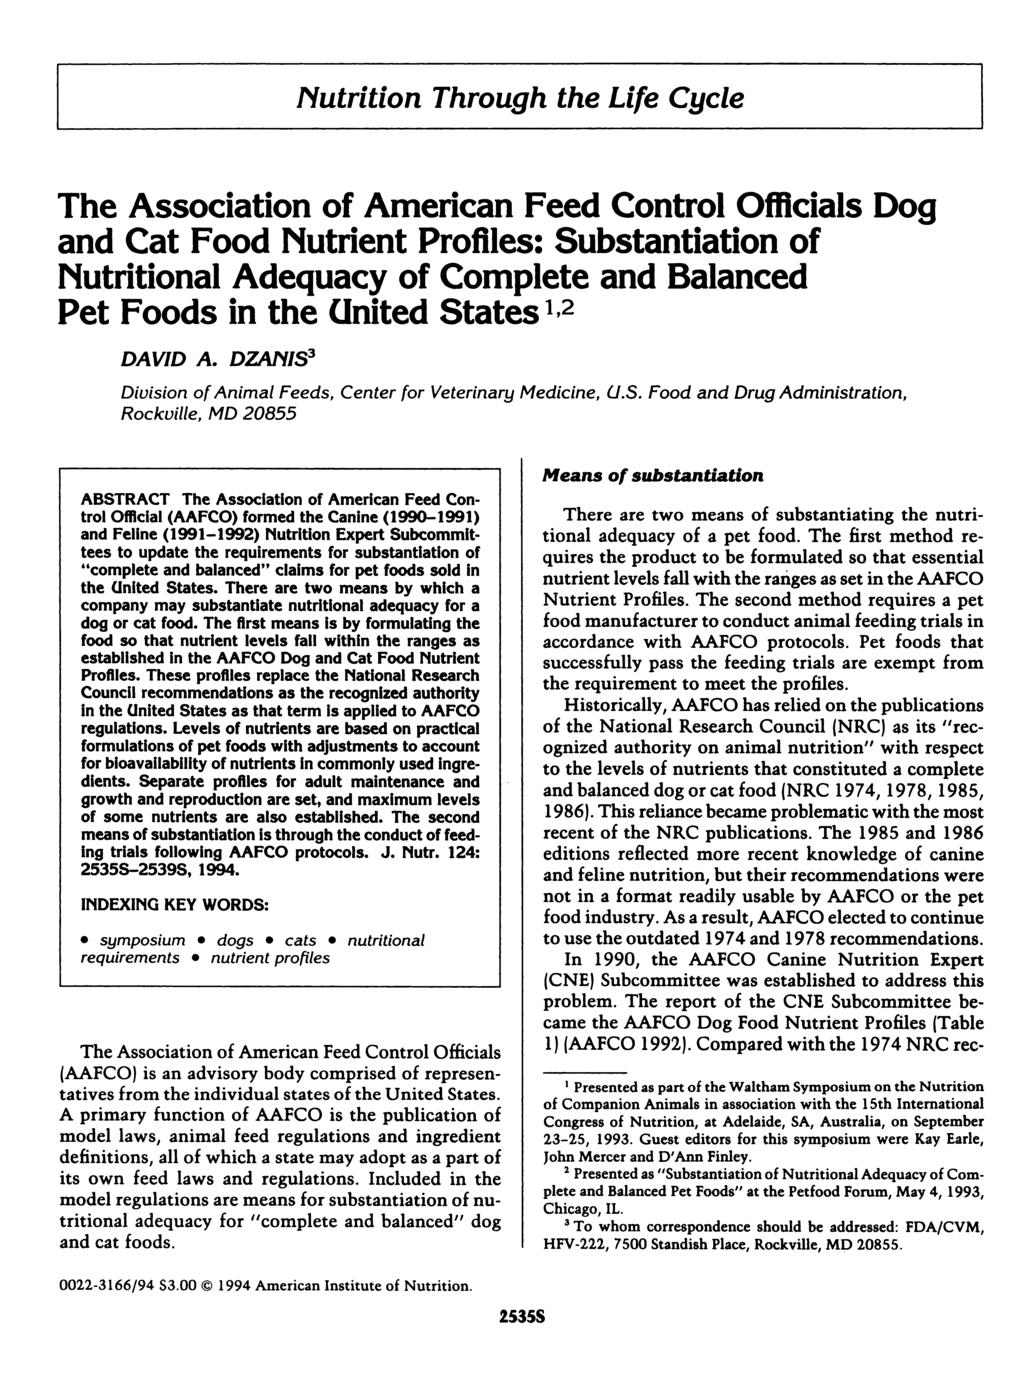 Nutrition Through the Life Cycle The Association of American Feed Control Officials Dog and Cat Food Nutrient Profiles: Substantiation of Nutritional Adequacy of Complete and Balanced Pet Foods in